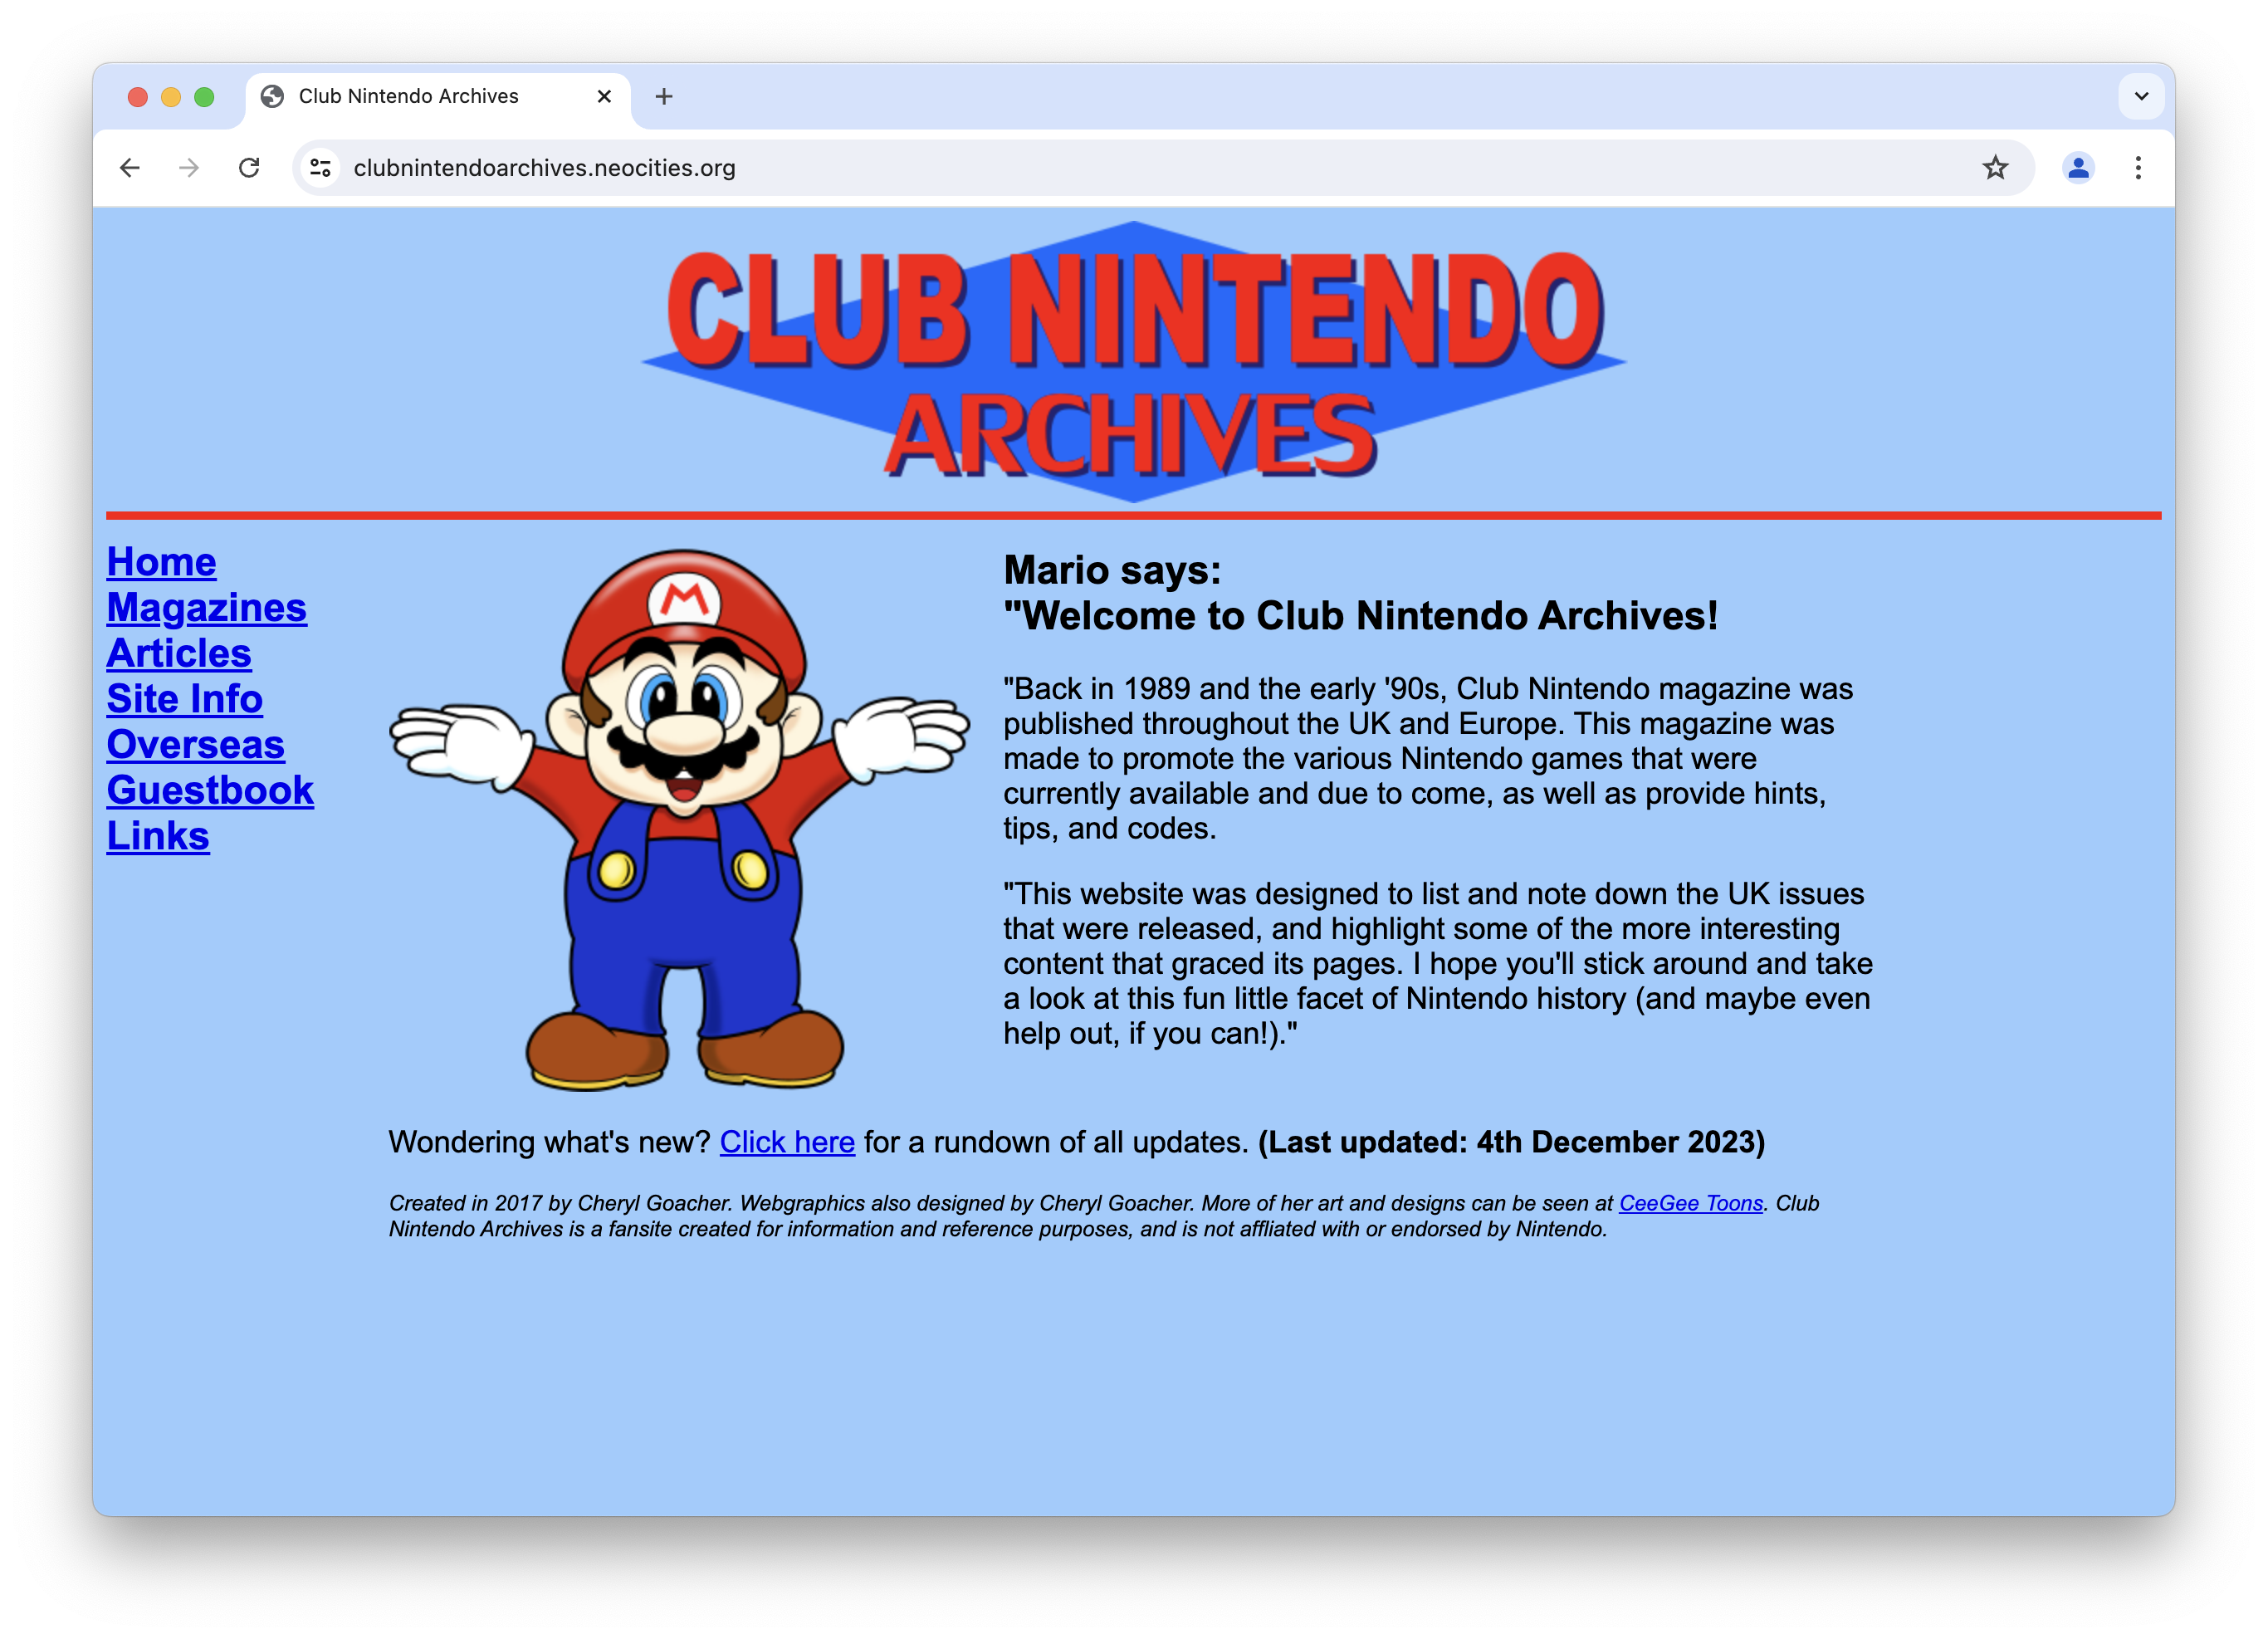 The Club Nintendo Archives website